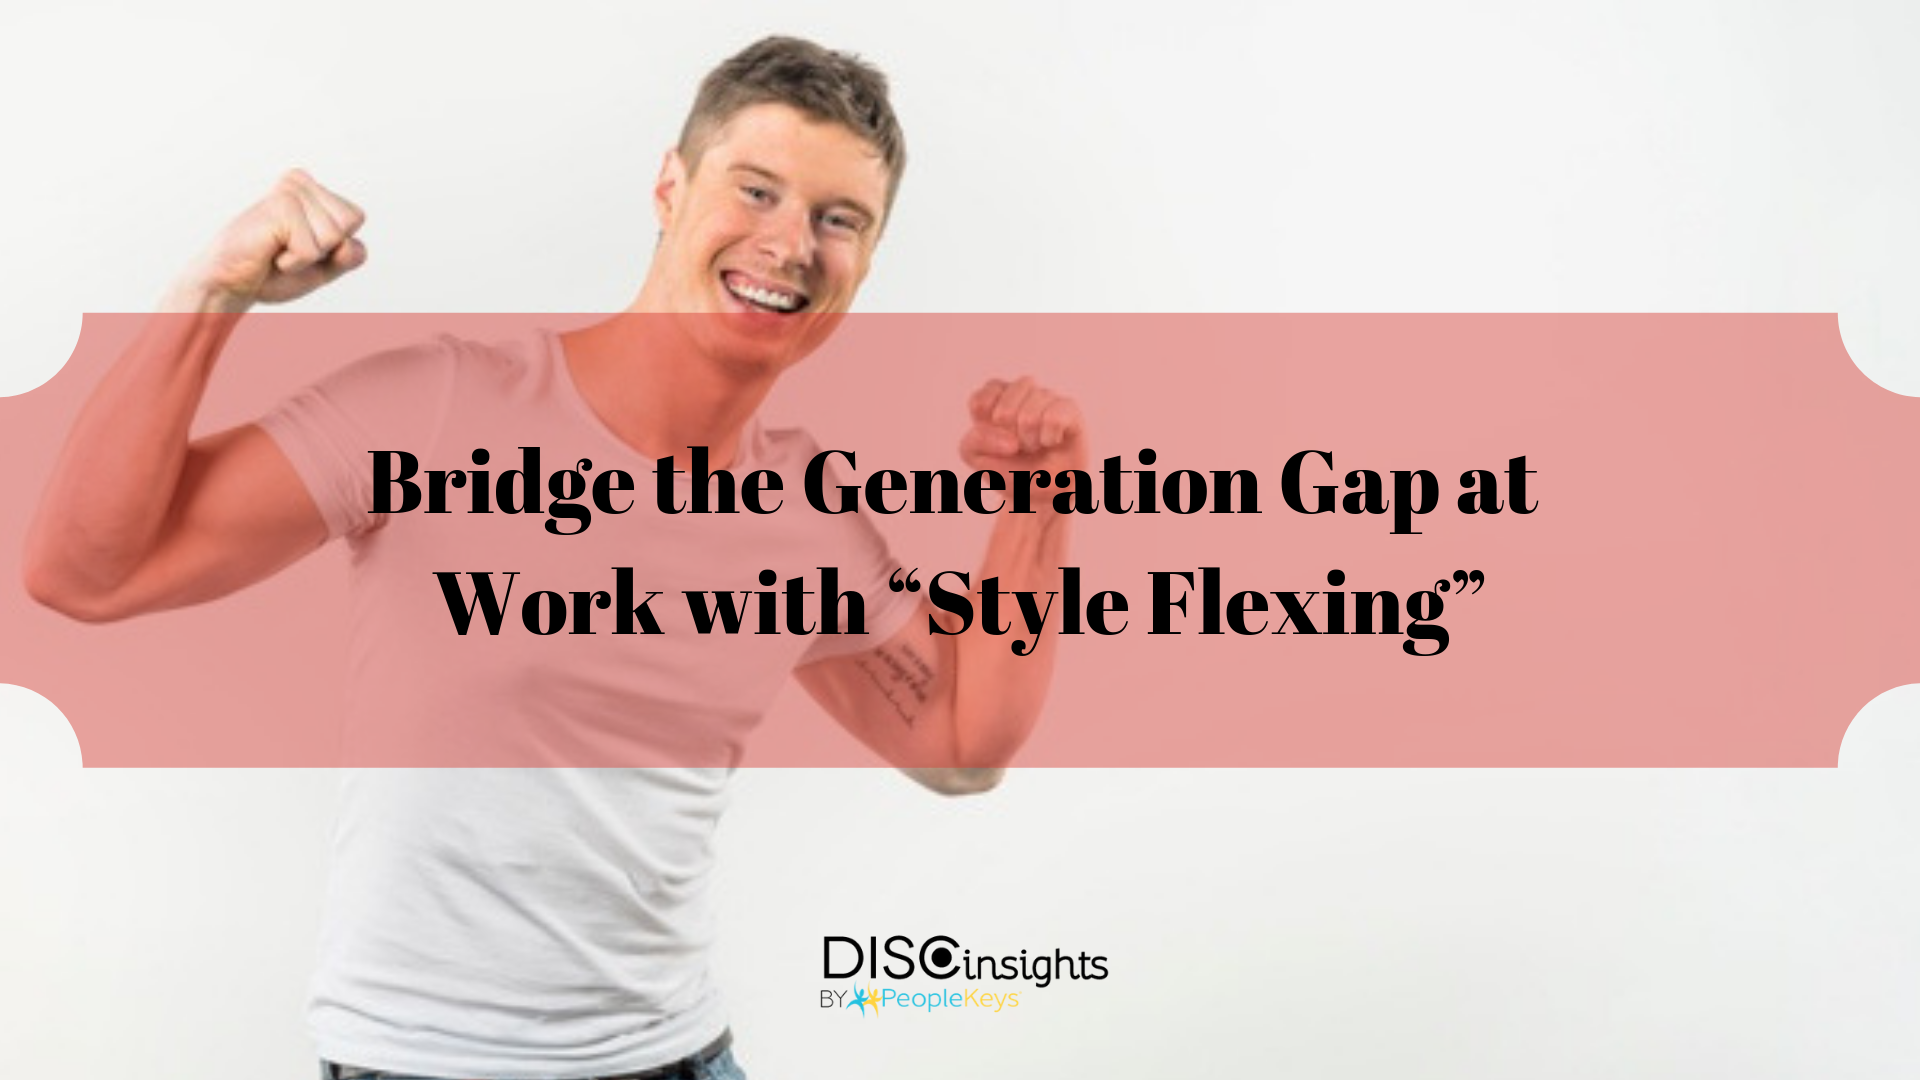 Bridge the Generation Gap at Work with “Style Flexing”